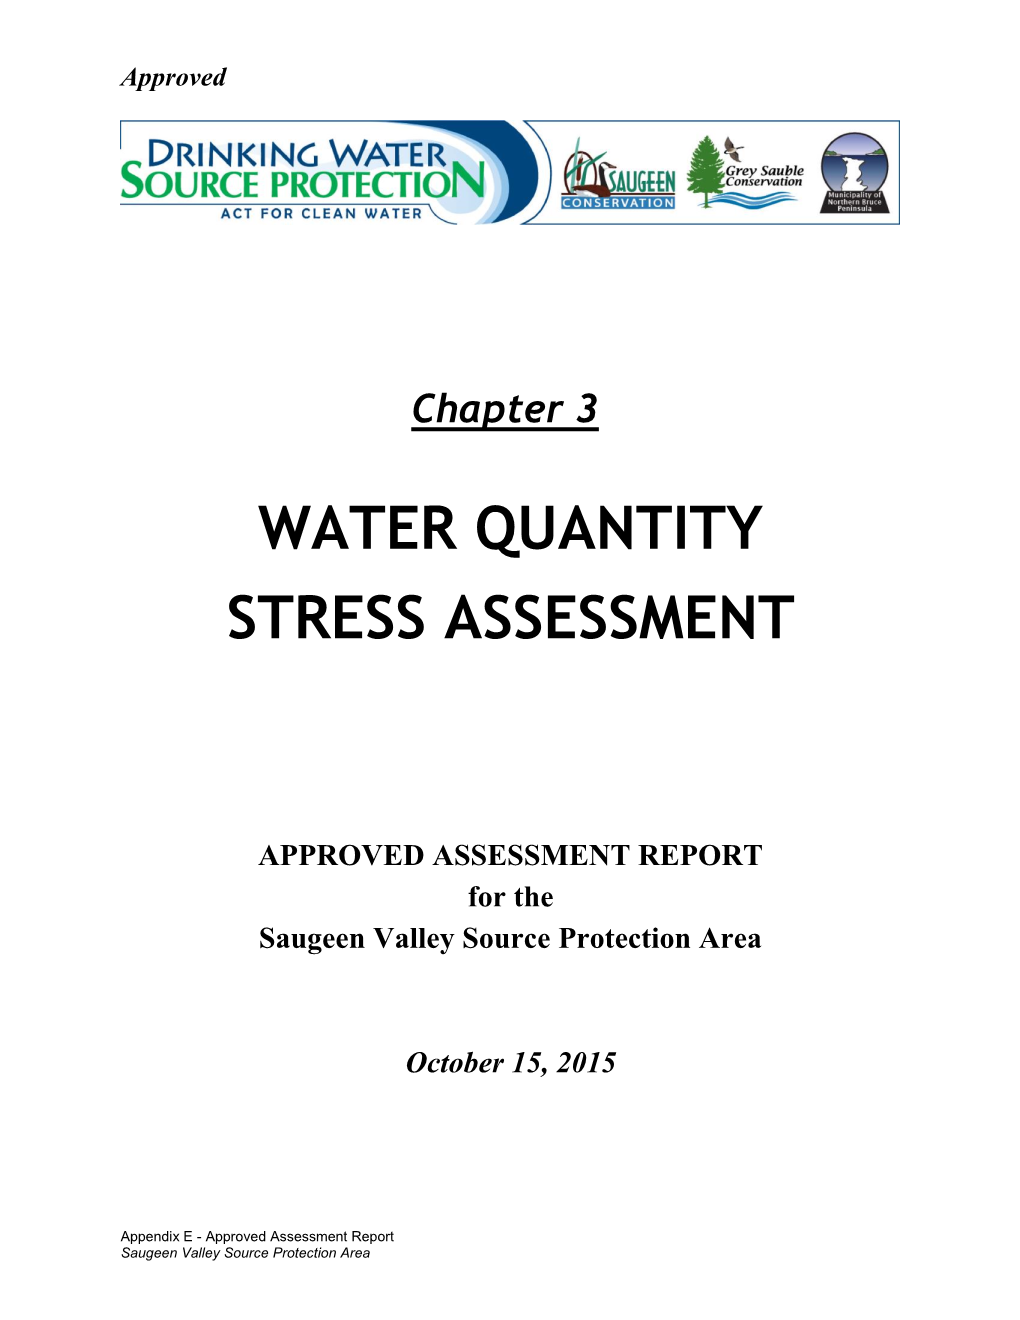 Chapter 3: Water Quantity Stress Assessment